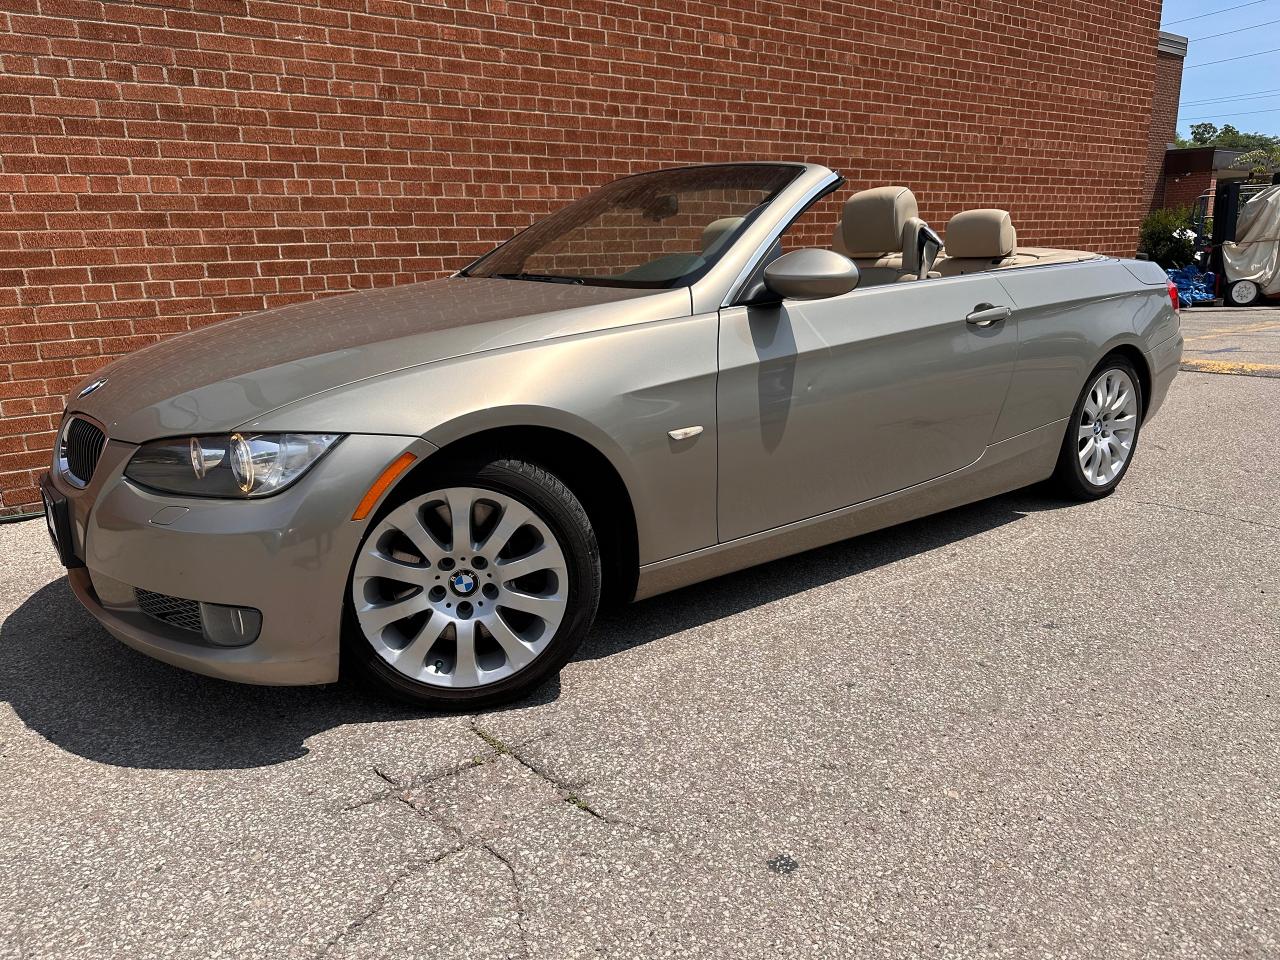 2007 BMW 3 Series 335i 2dr Cabriolet RWD, Certified - Photo #2